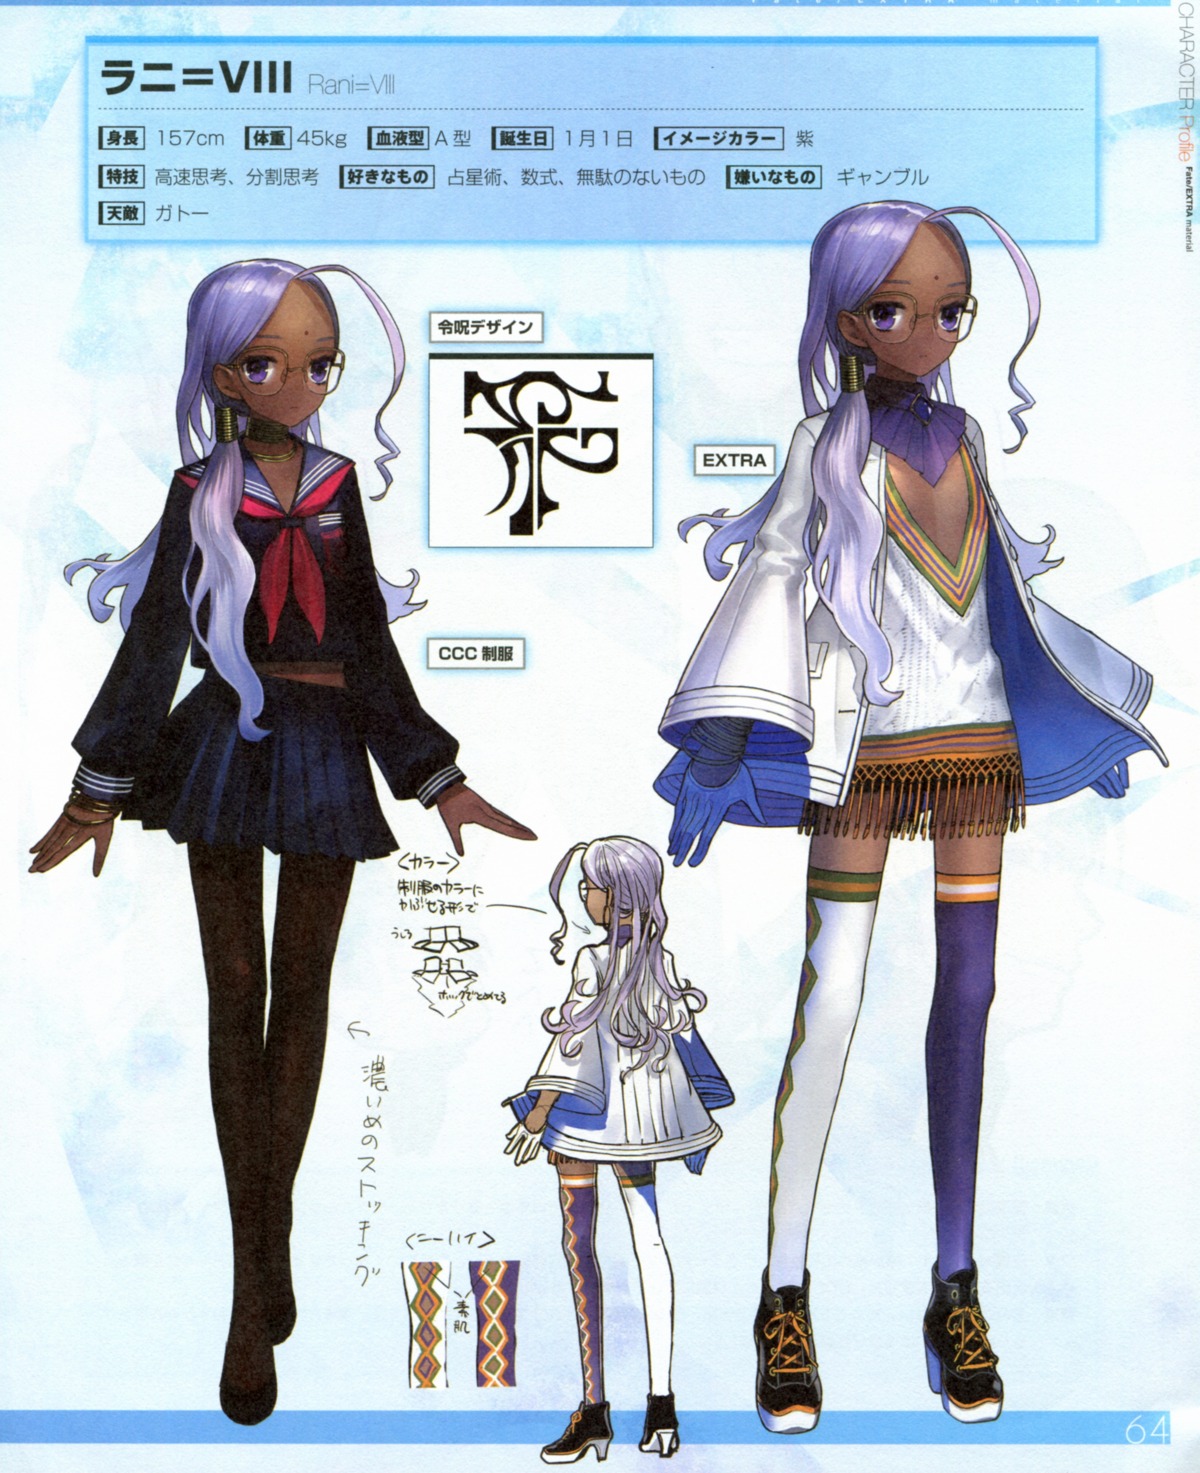 Type Moon Wada Rco Fate Extra Fate Extra Ccc Fate Stay Night Rani Viii Megane Seifuku Thighhighs Paper Texture Yande Re